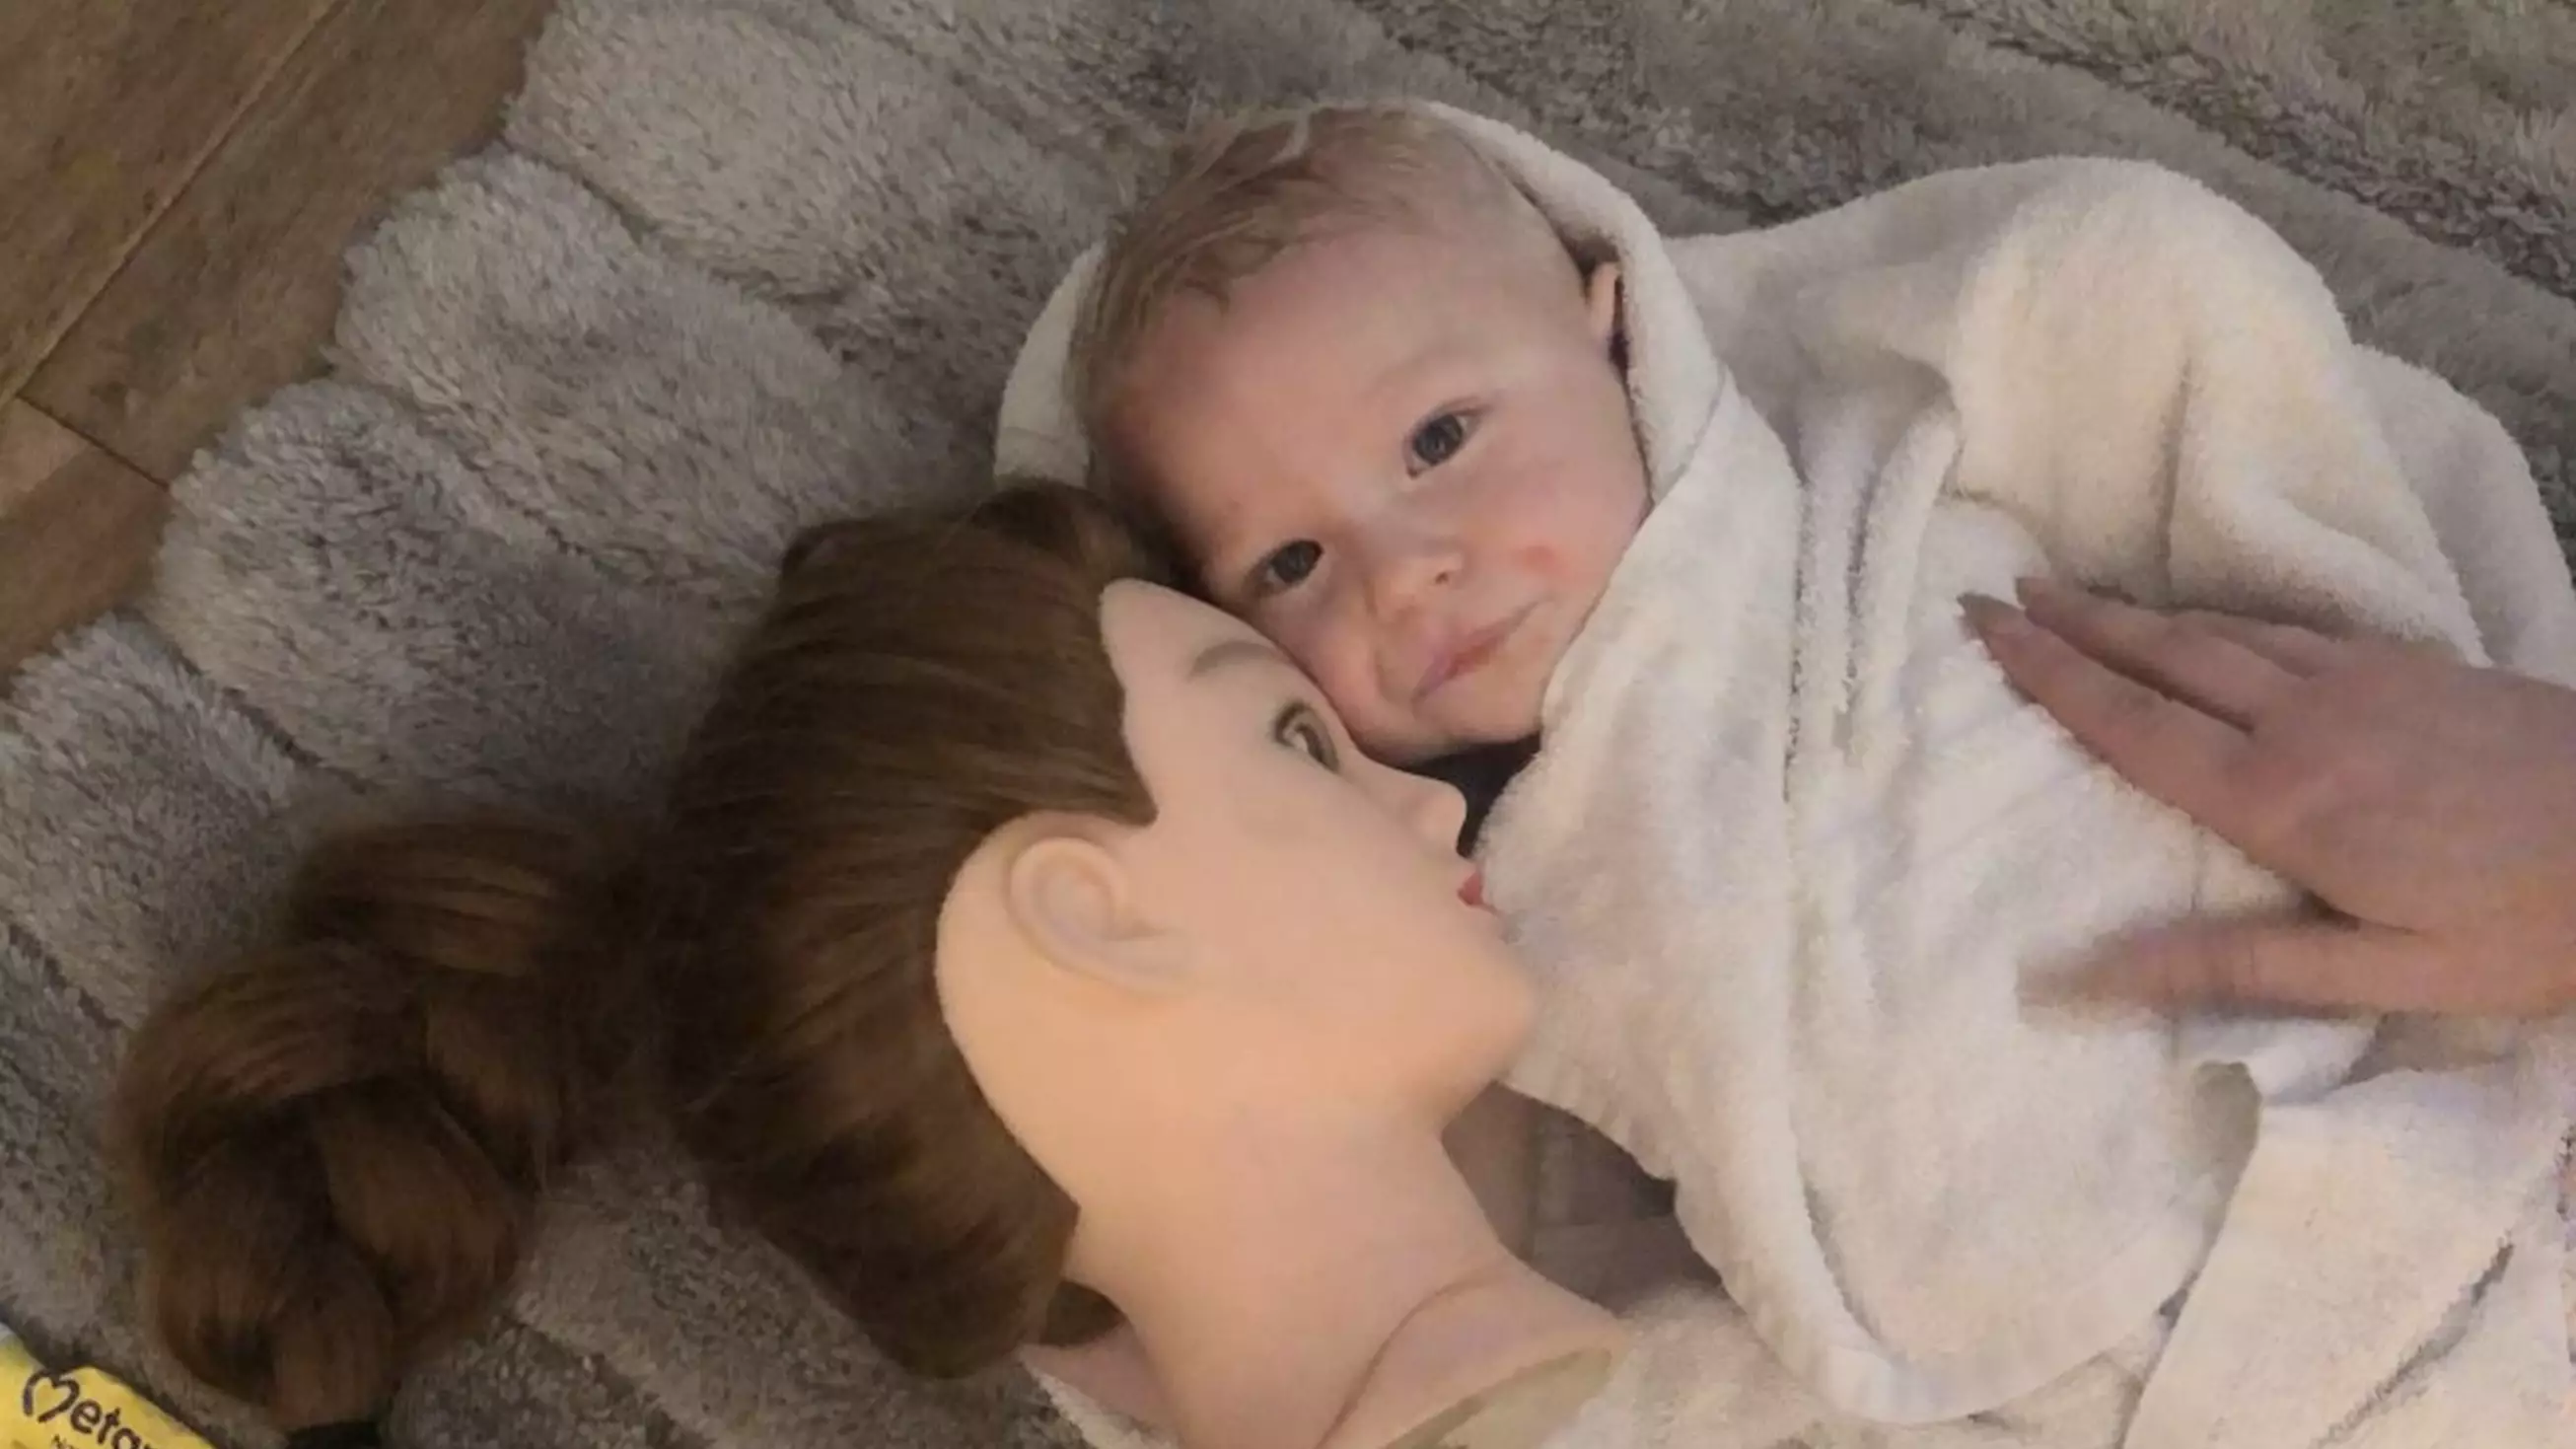 Mum's Plan To Help Baby Sleep Backfires As He Becomes Obsessed With Doll's Head 